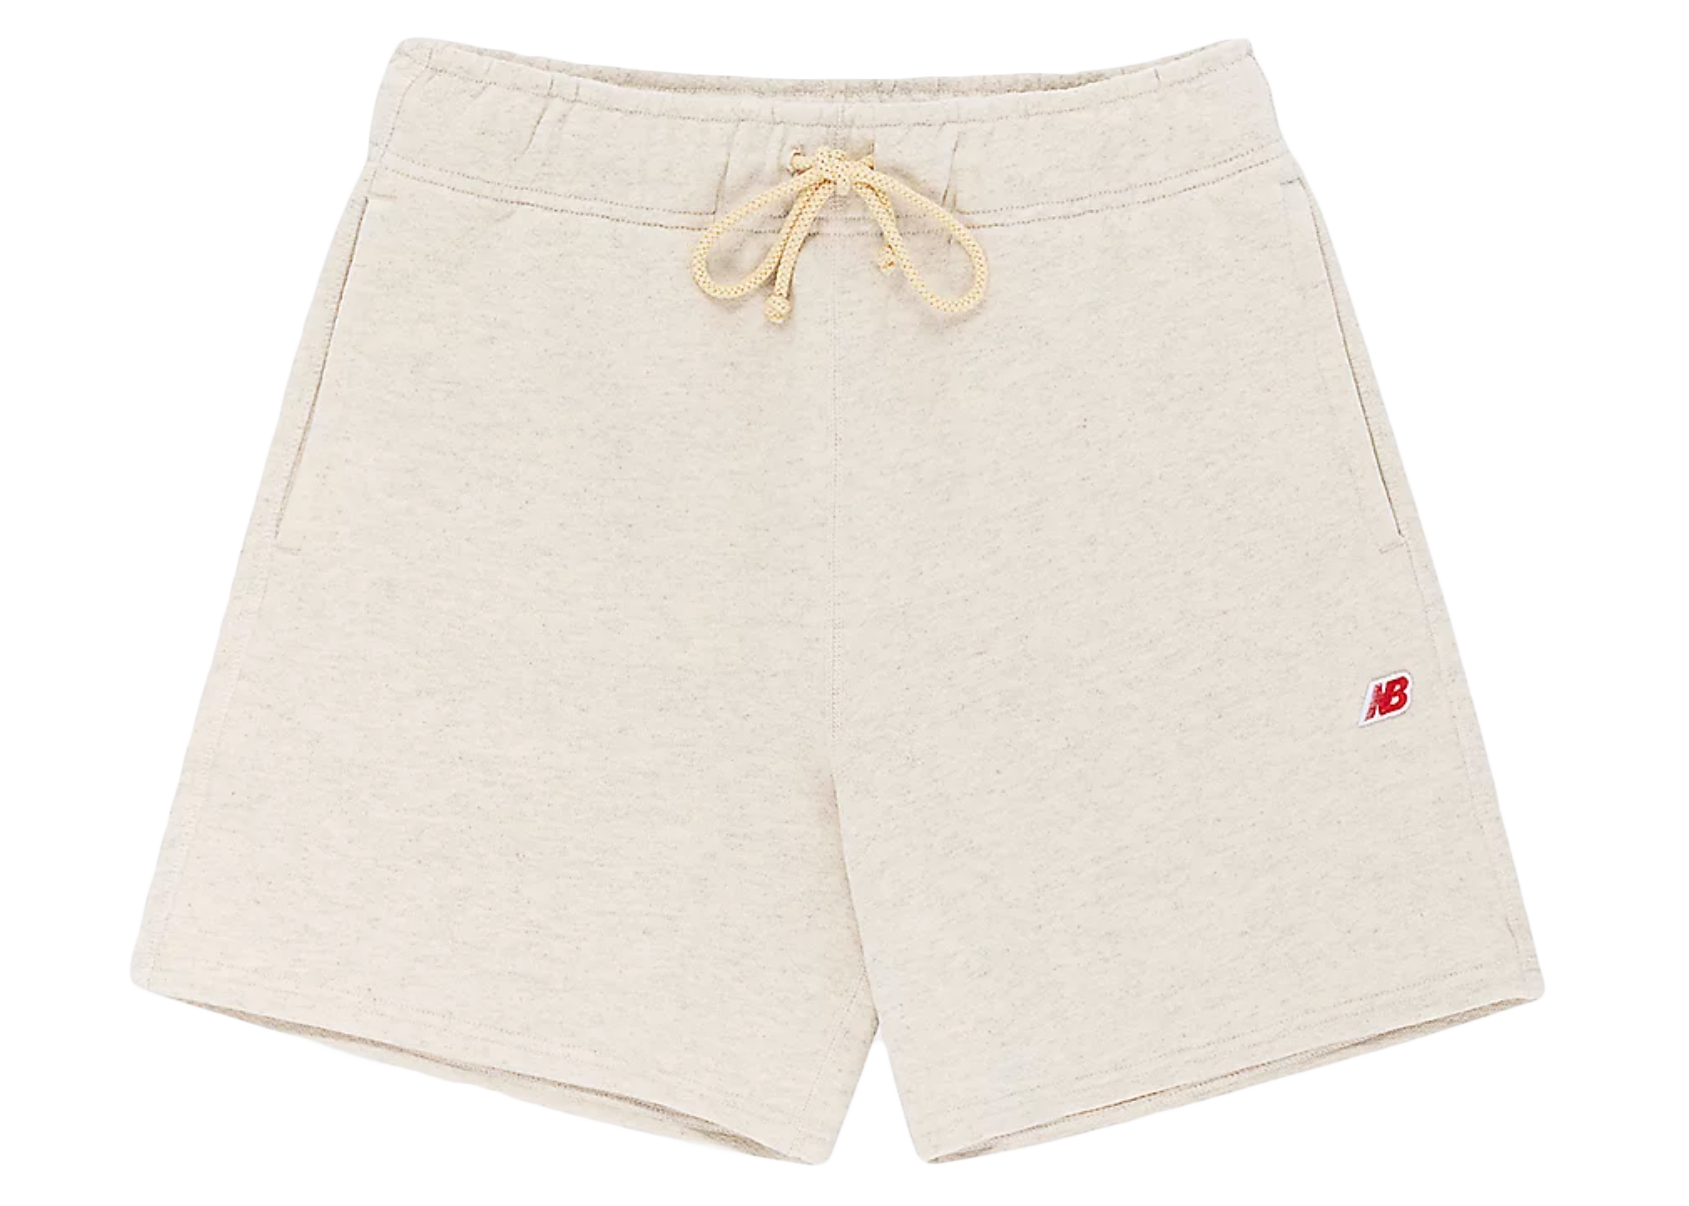 New Balance Made in USA Core Shorts Oatmeal Heather Men's - SS22 - US